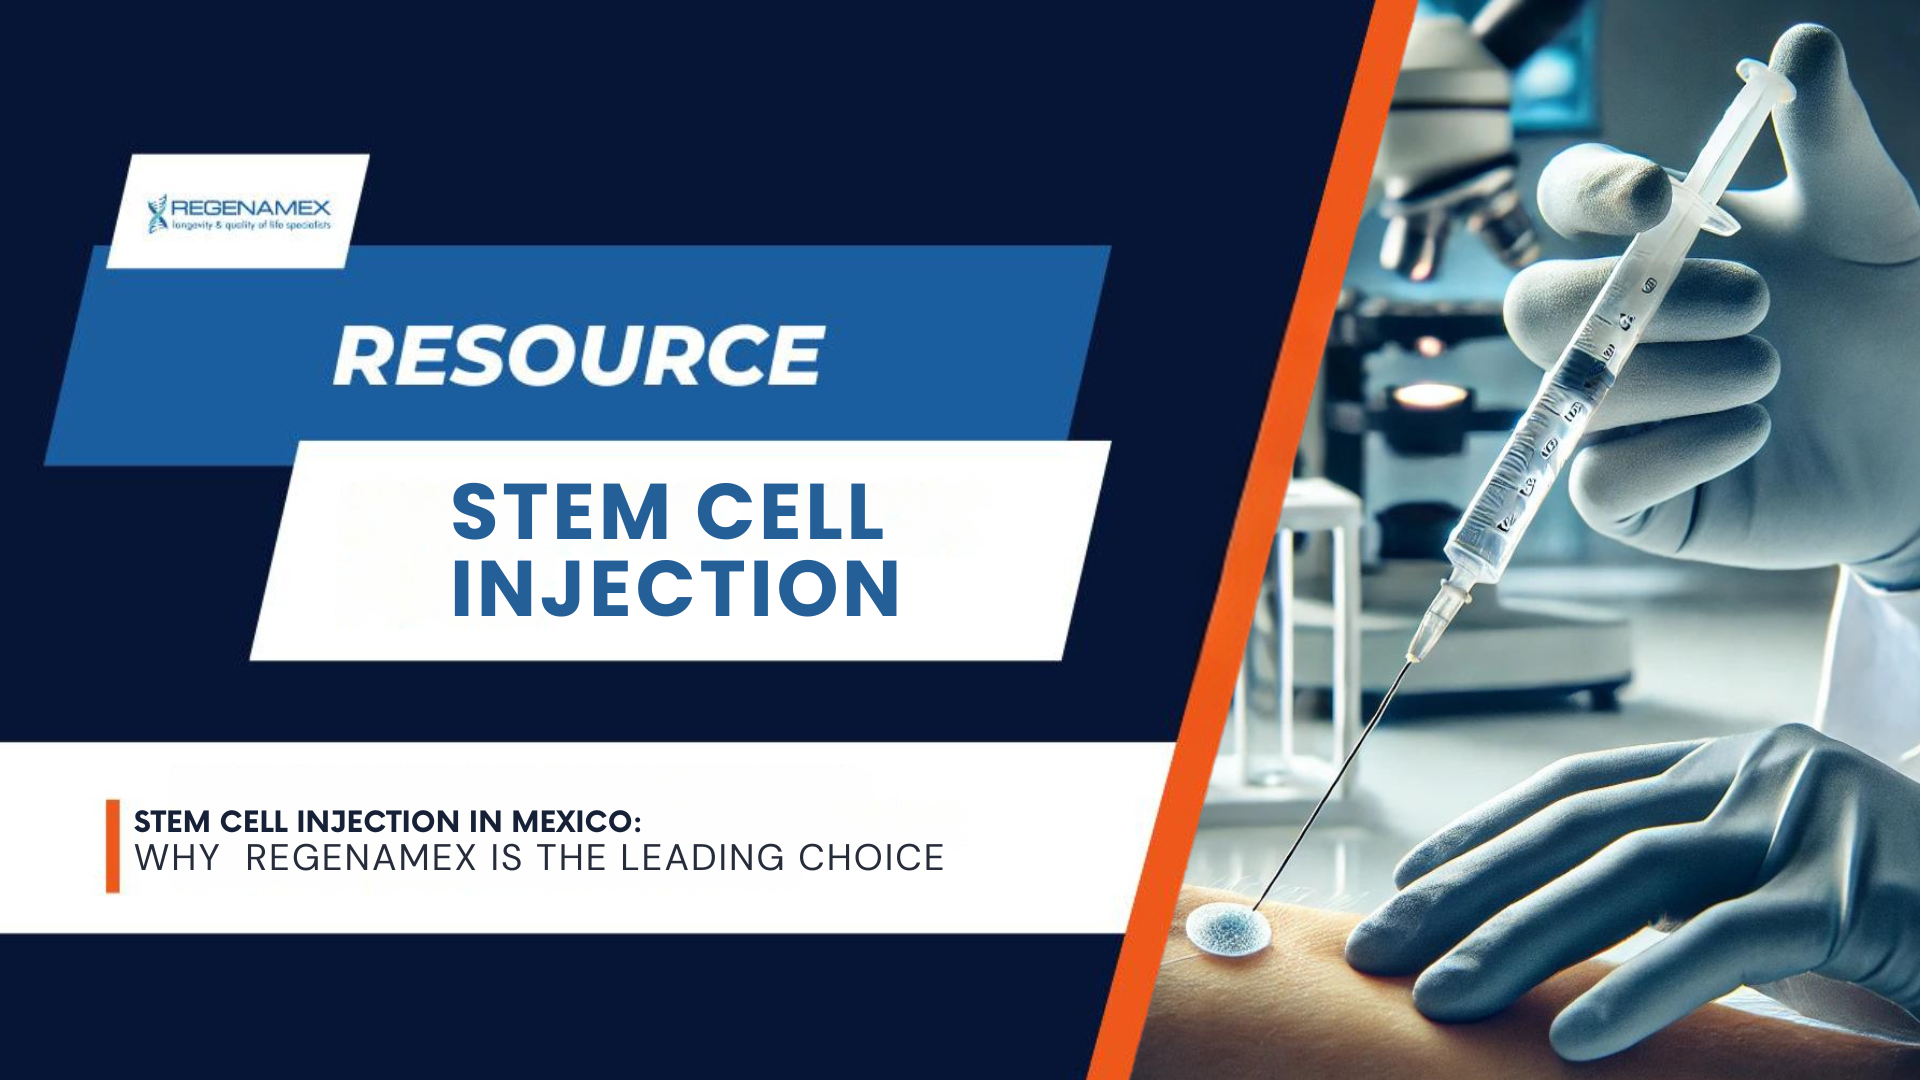 Stem cell injection